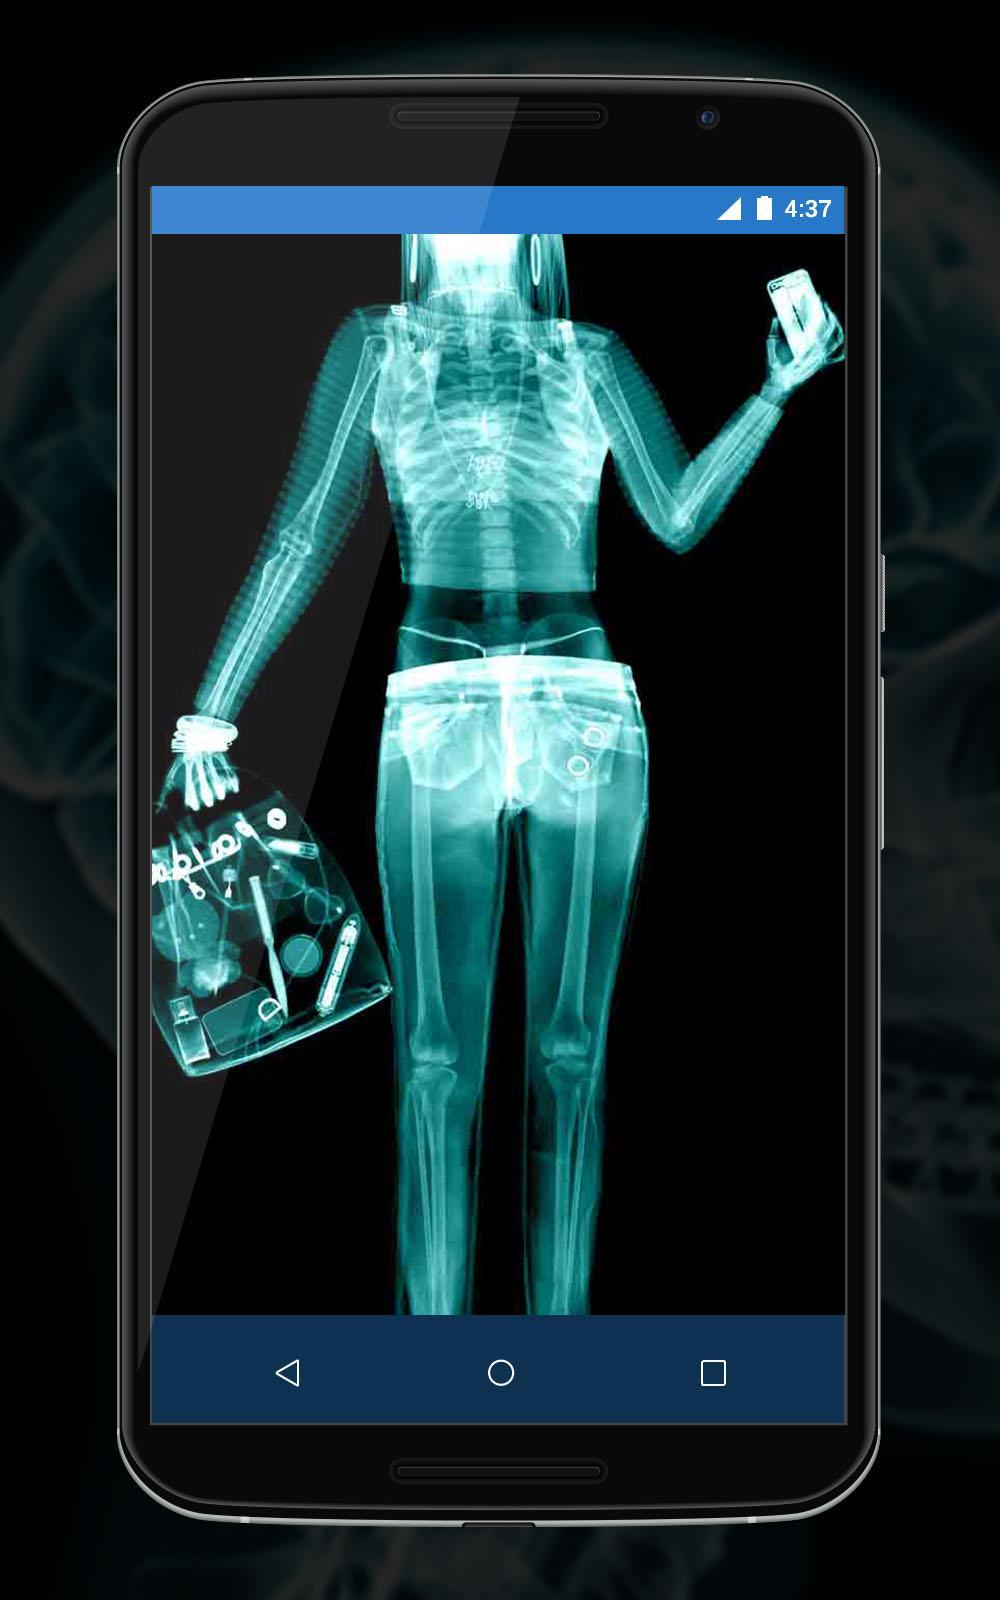 Xray Camera Scanner for Android - APK Download